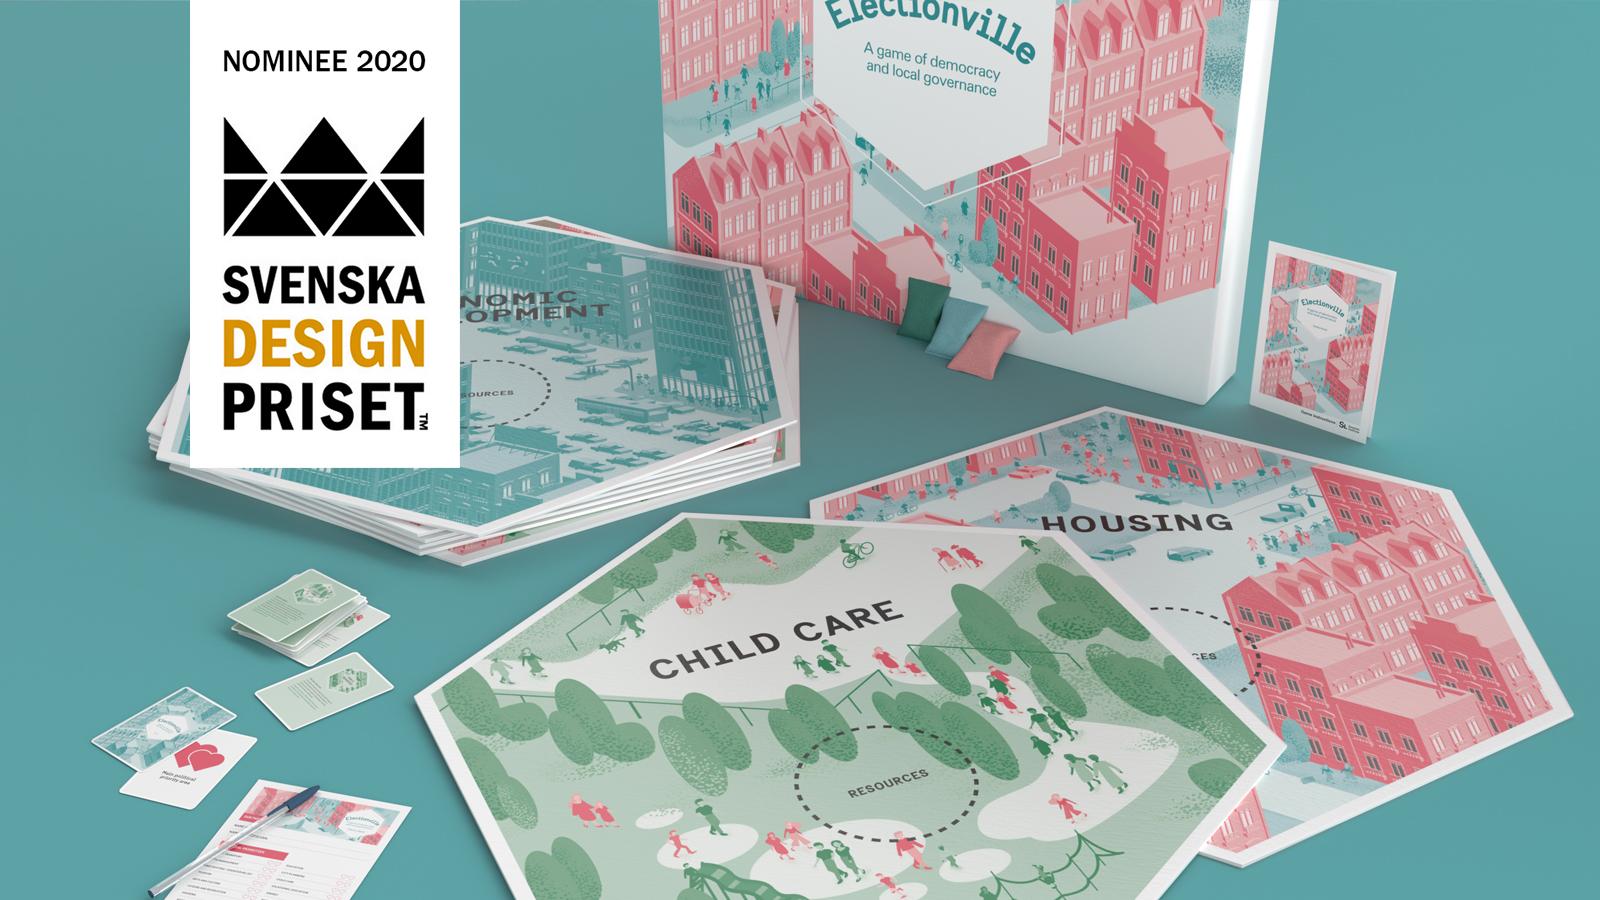 A democracy game nominated for the Swedish design award 2020. 